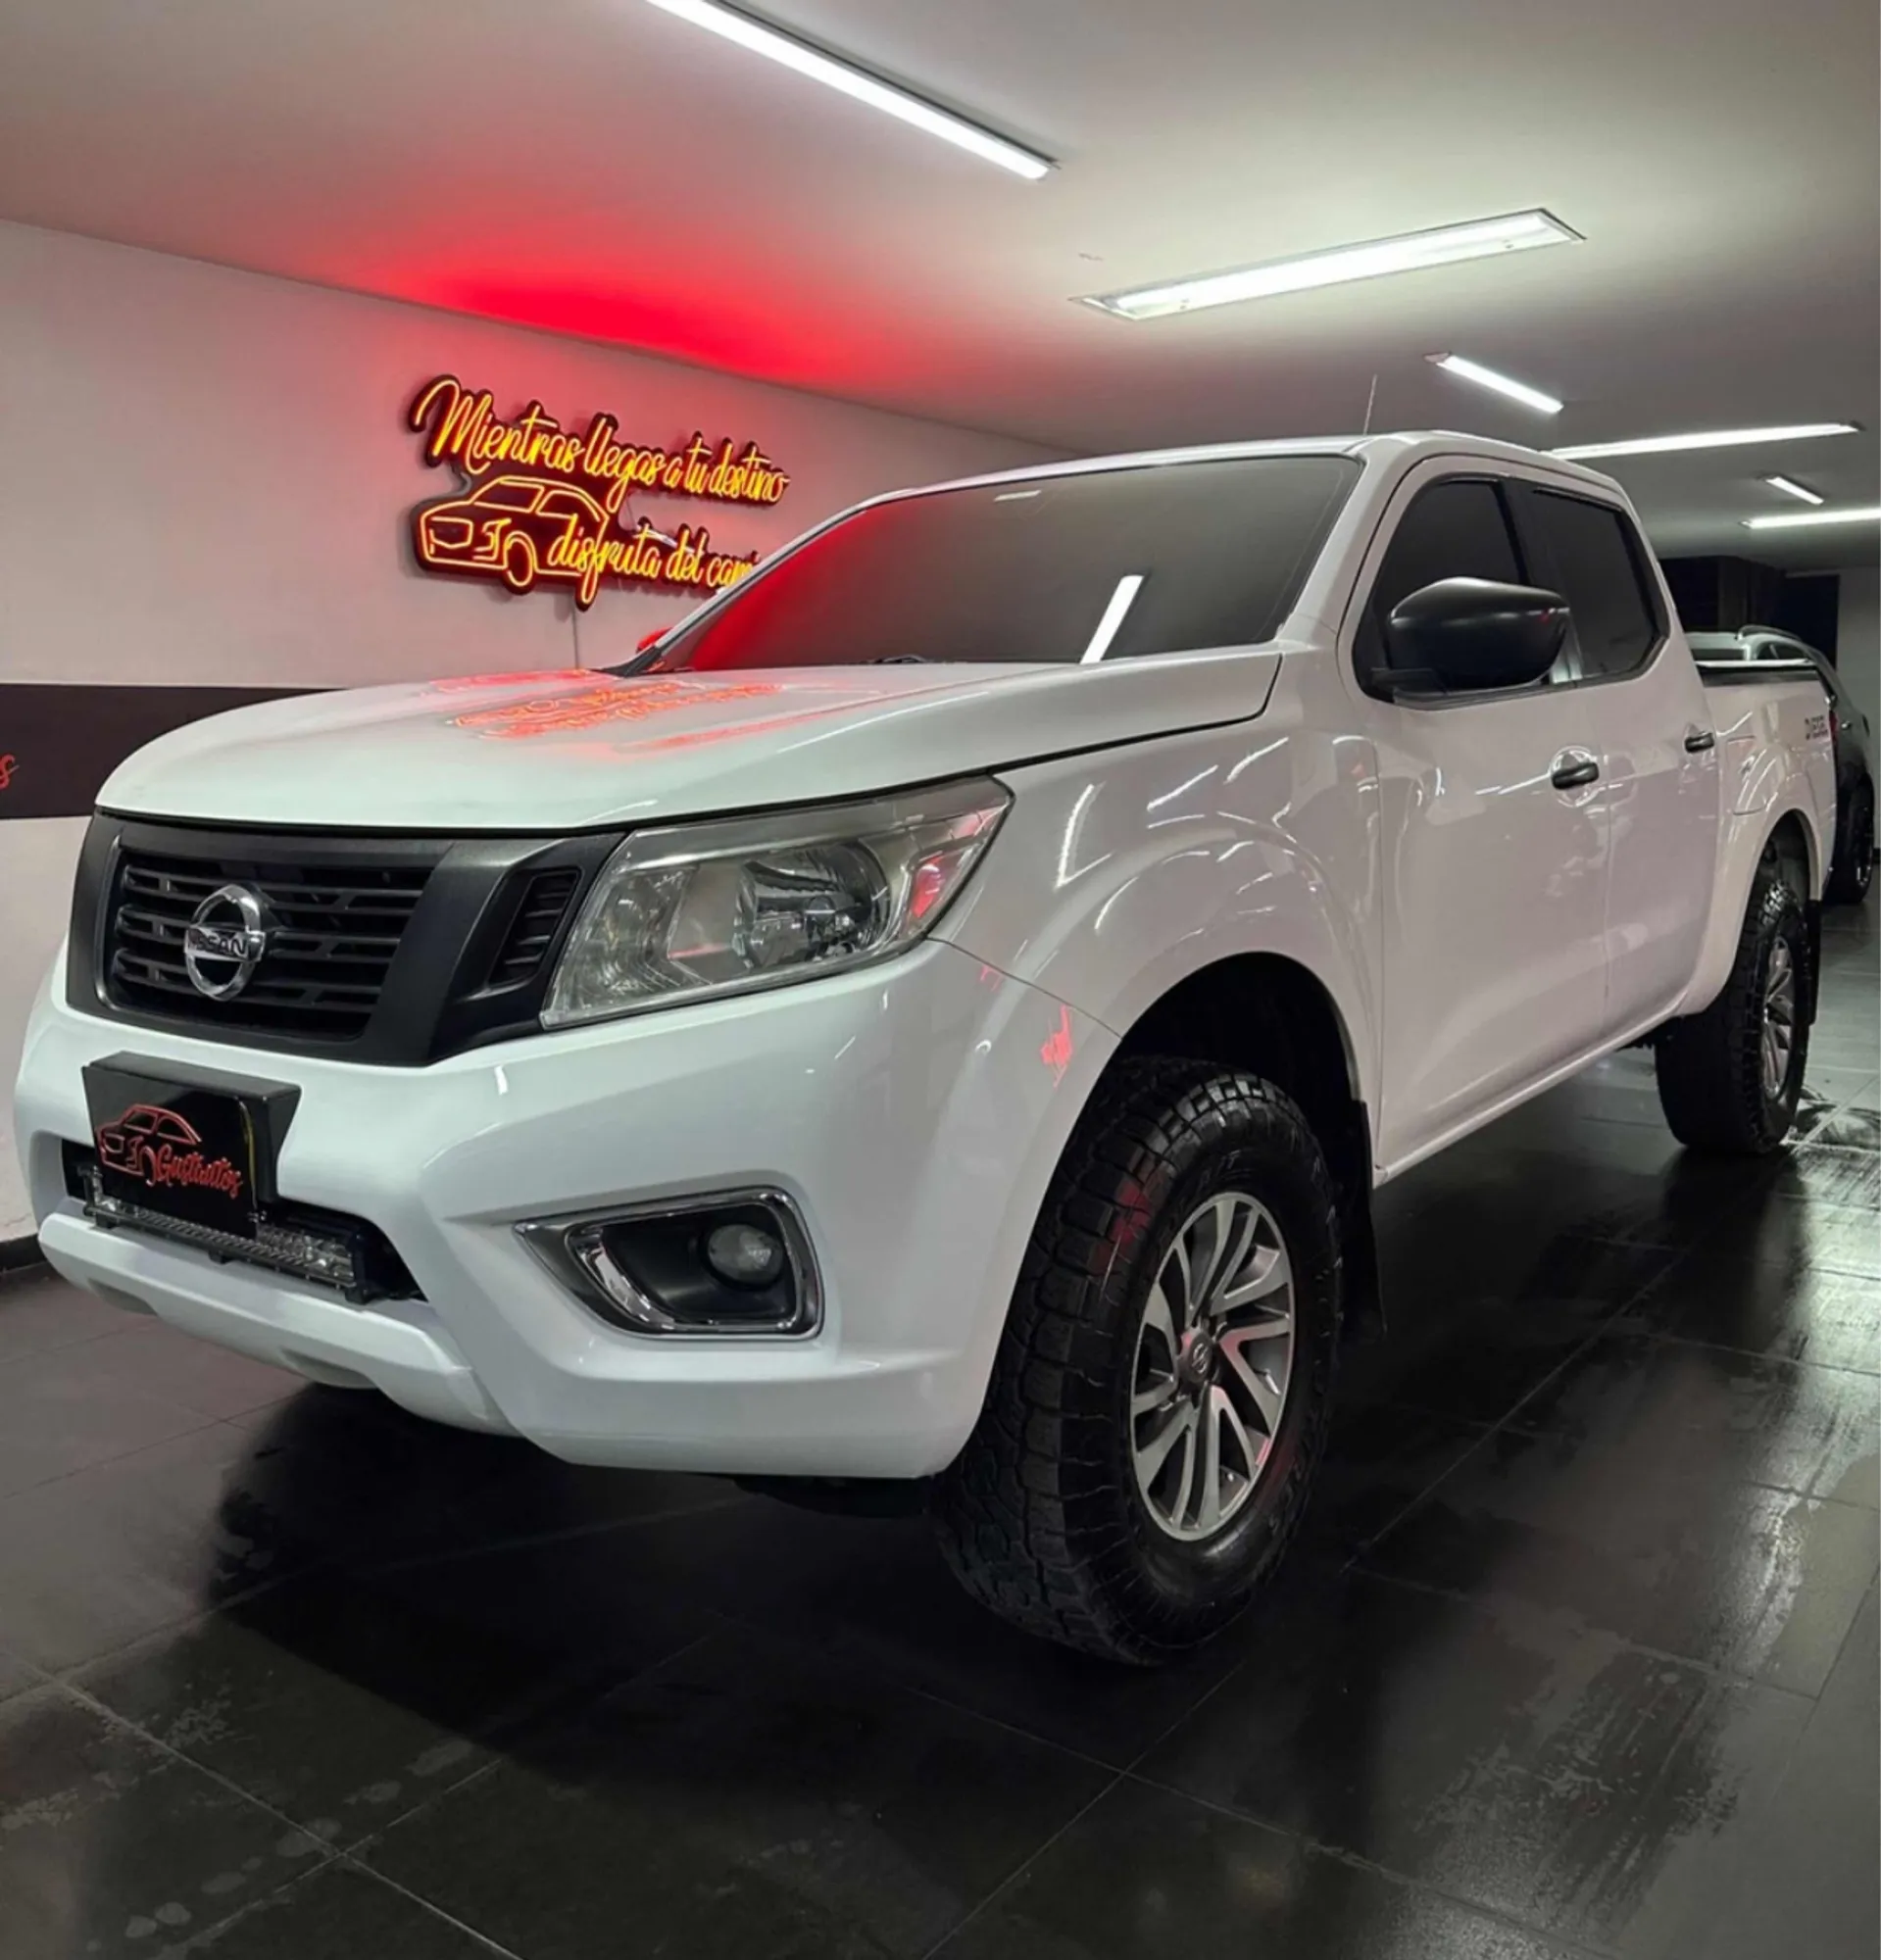 Nissan NP300 Frontier 2017 mecánica 2.5 diesel 4x4